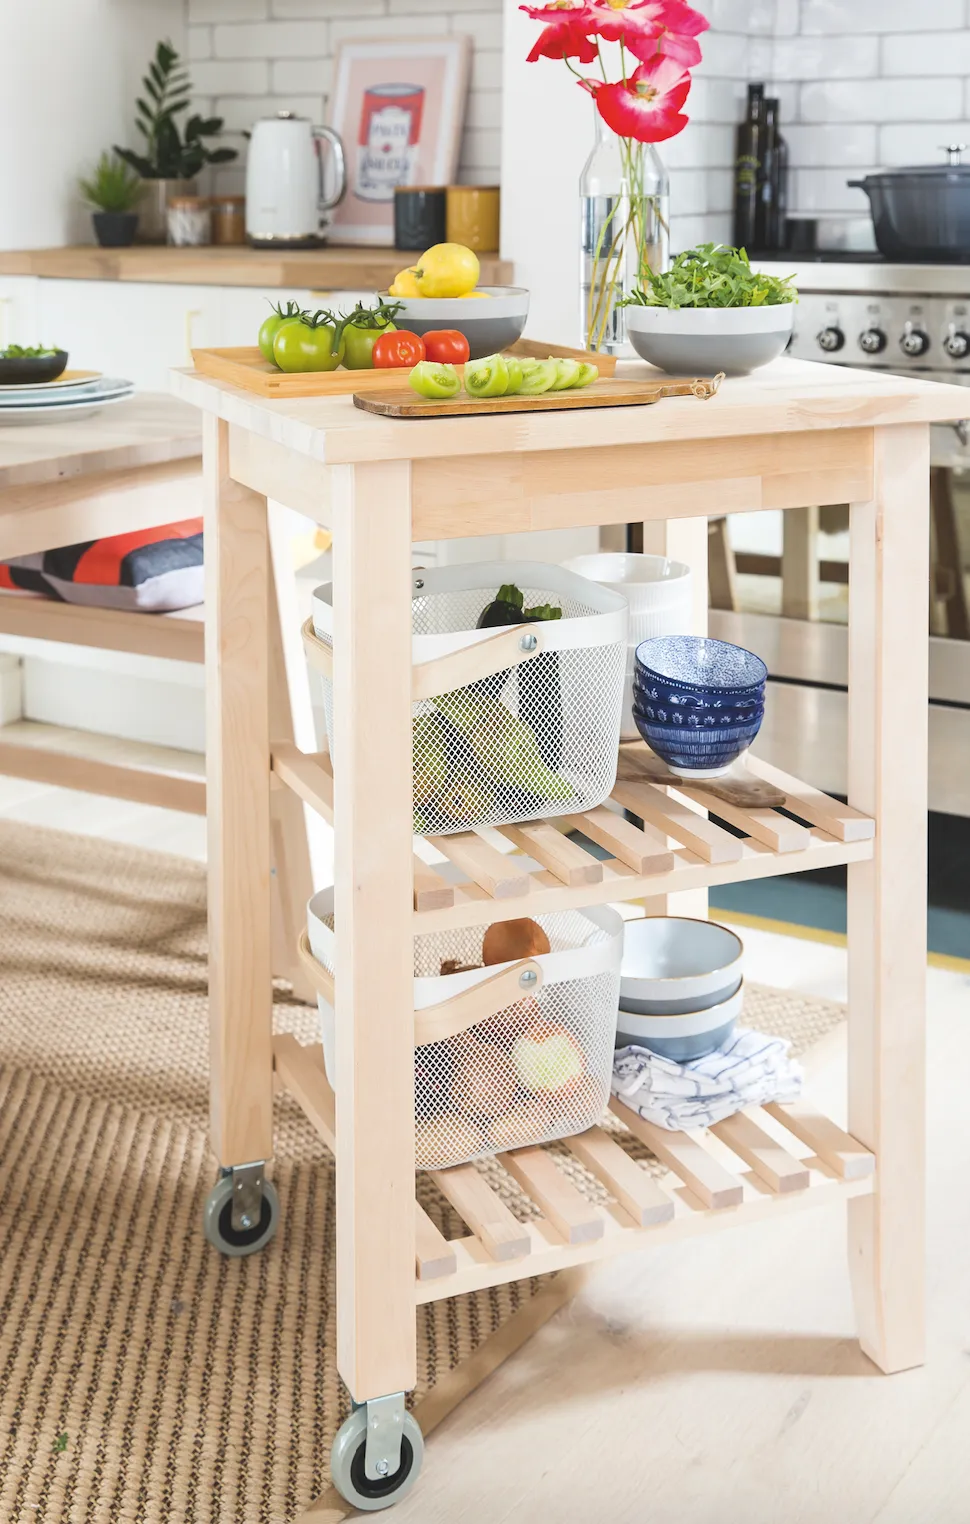 A handy trolley on wheels is useful in a small space, providing extra storage and a chopping board surface that can be moved around for convenience while cooking